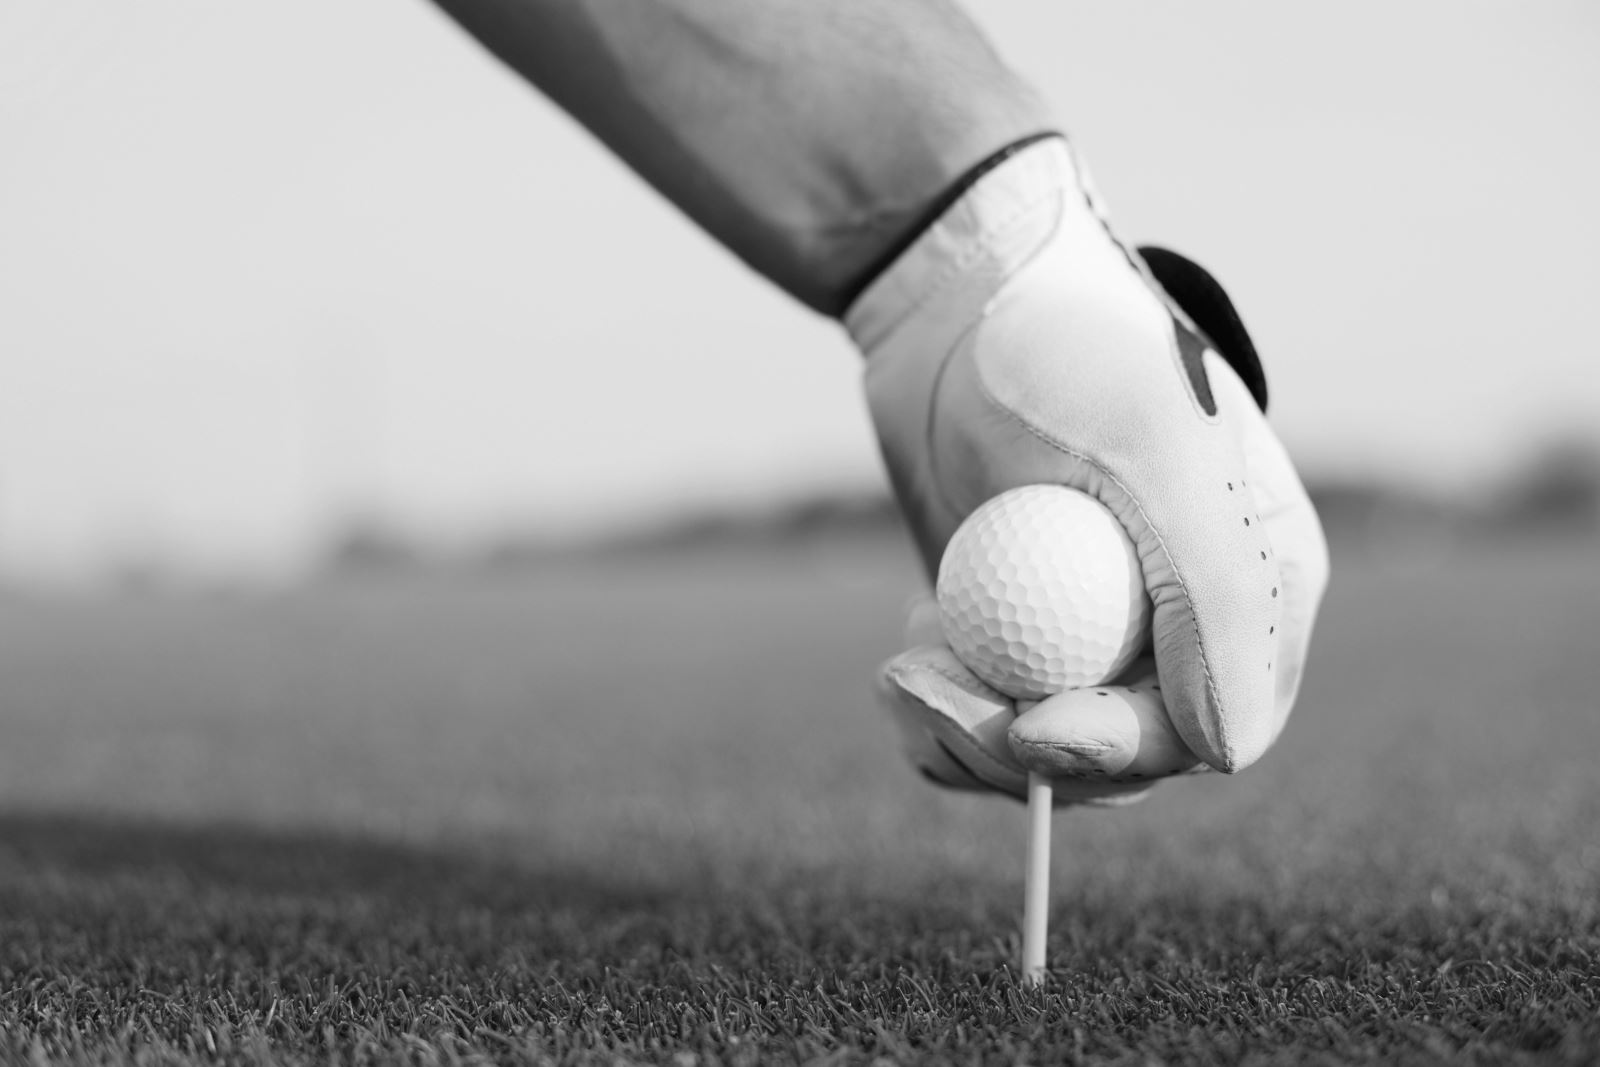 Black and white image of a man putting a golf ball and tee in the ground